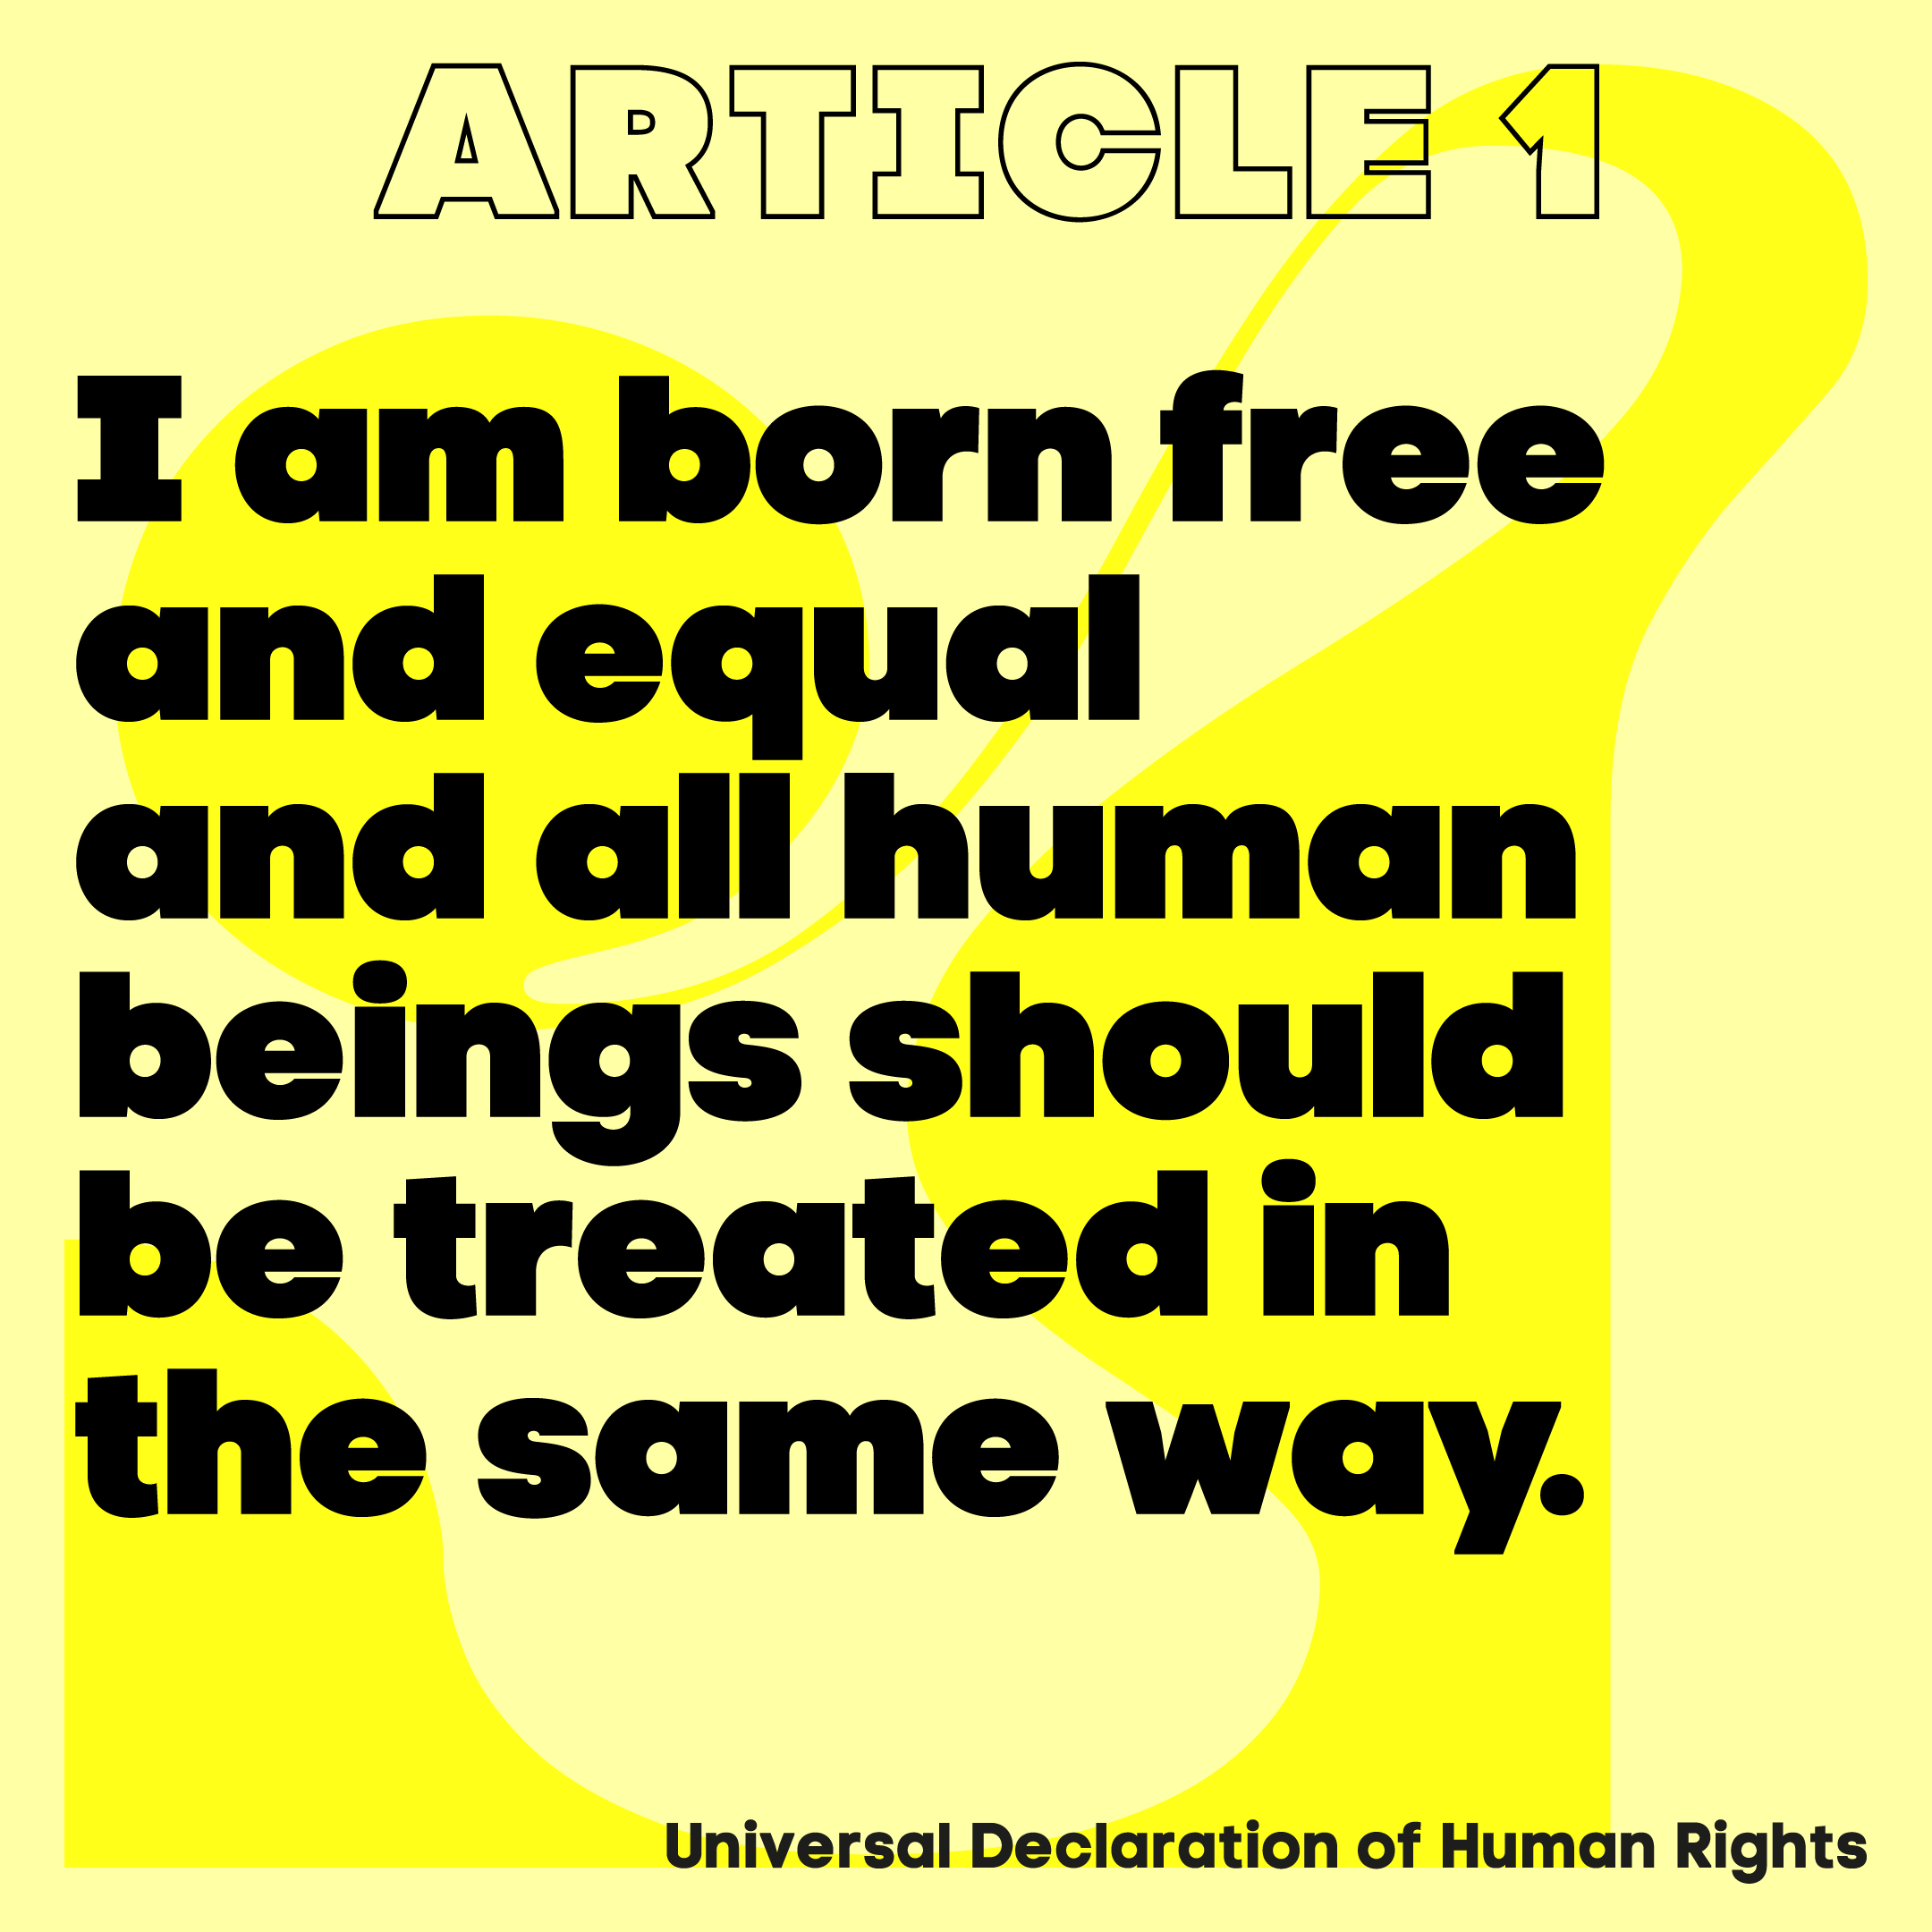 Article 1 I am born free and equal and all human beings should be treated in the same way.